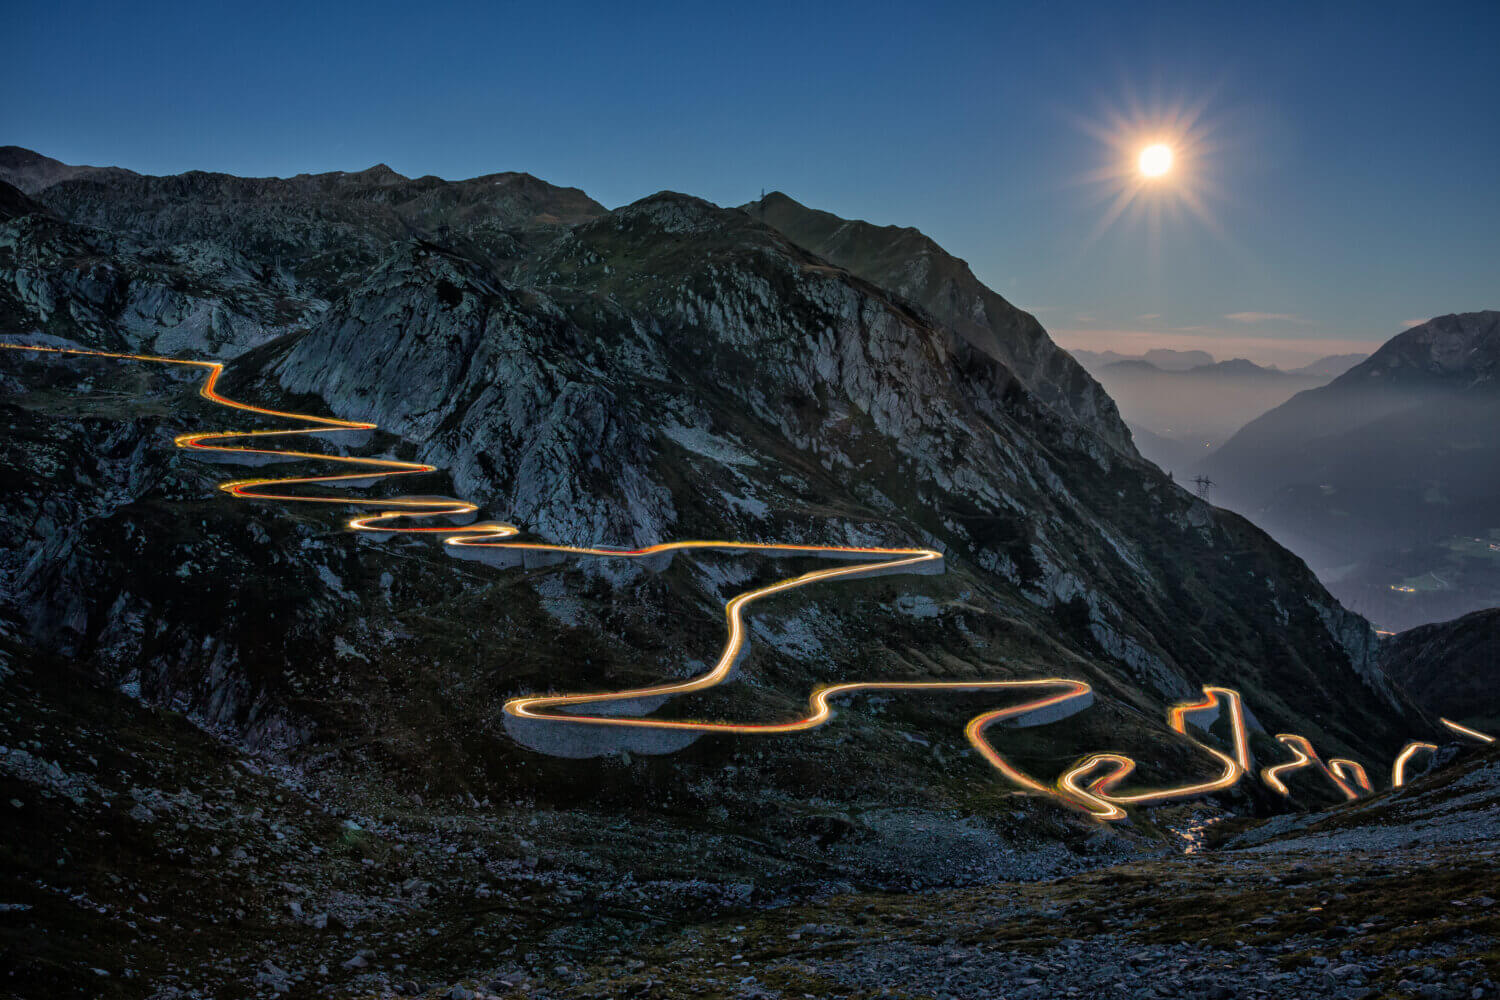 Lit up highway snaking through the mountains